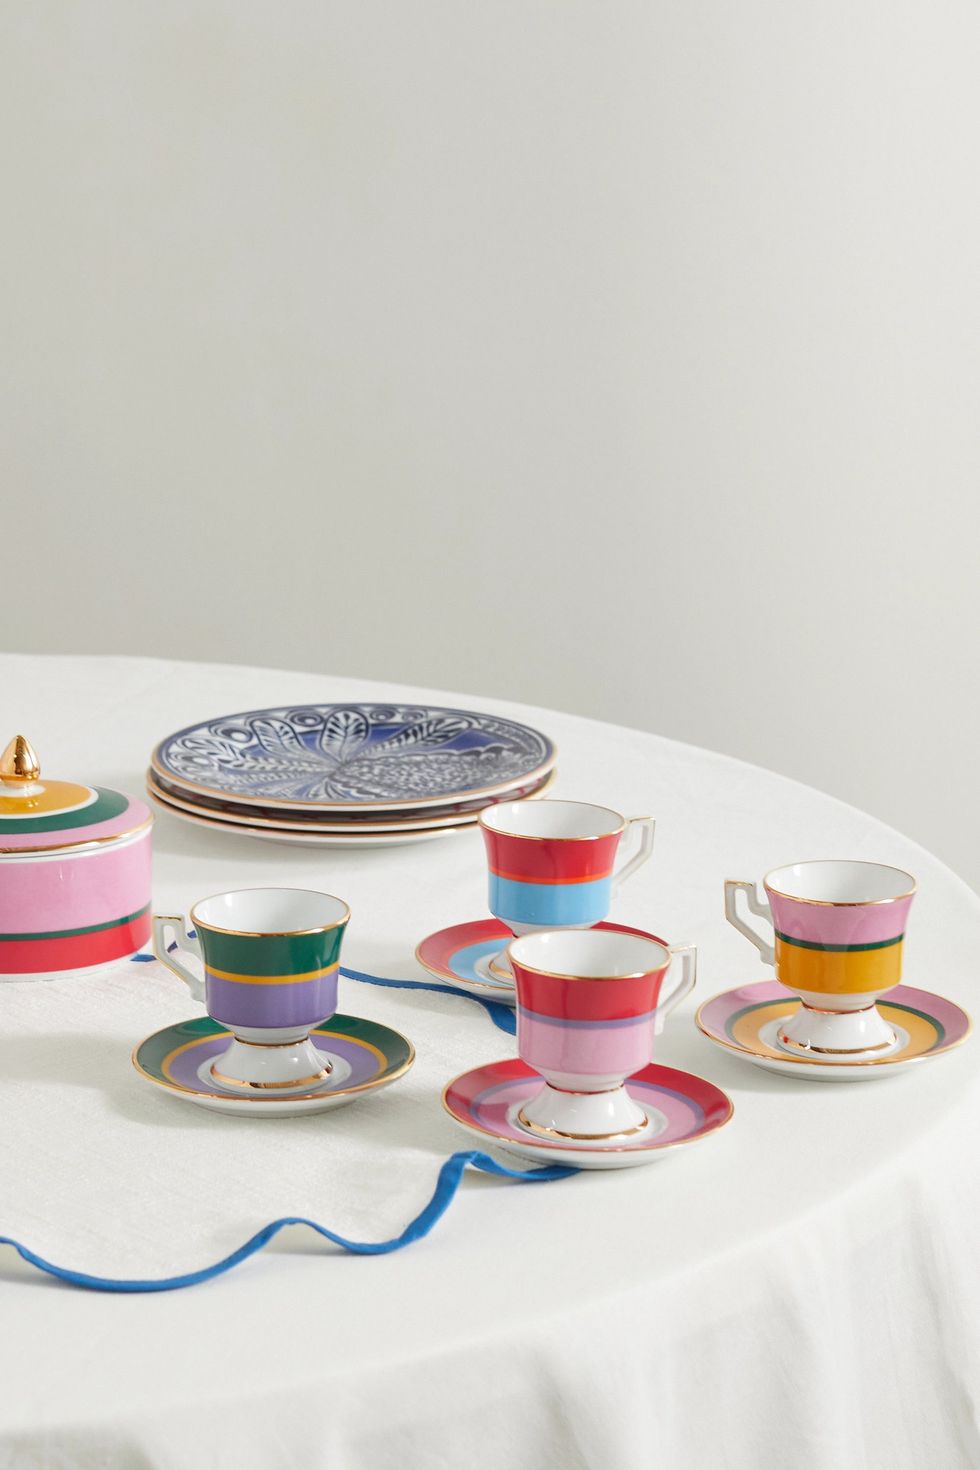 Set of four gold-plated porcelain espresso cups and saucers